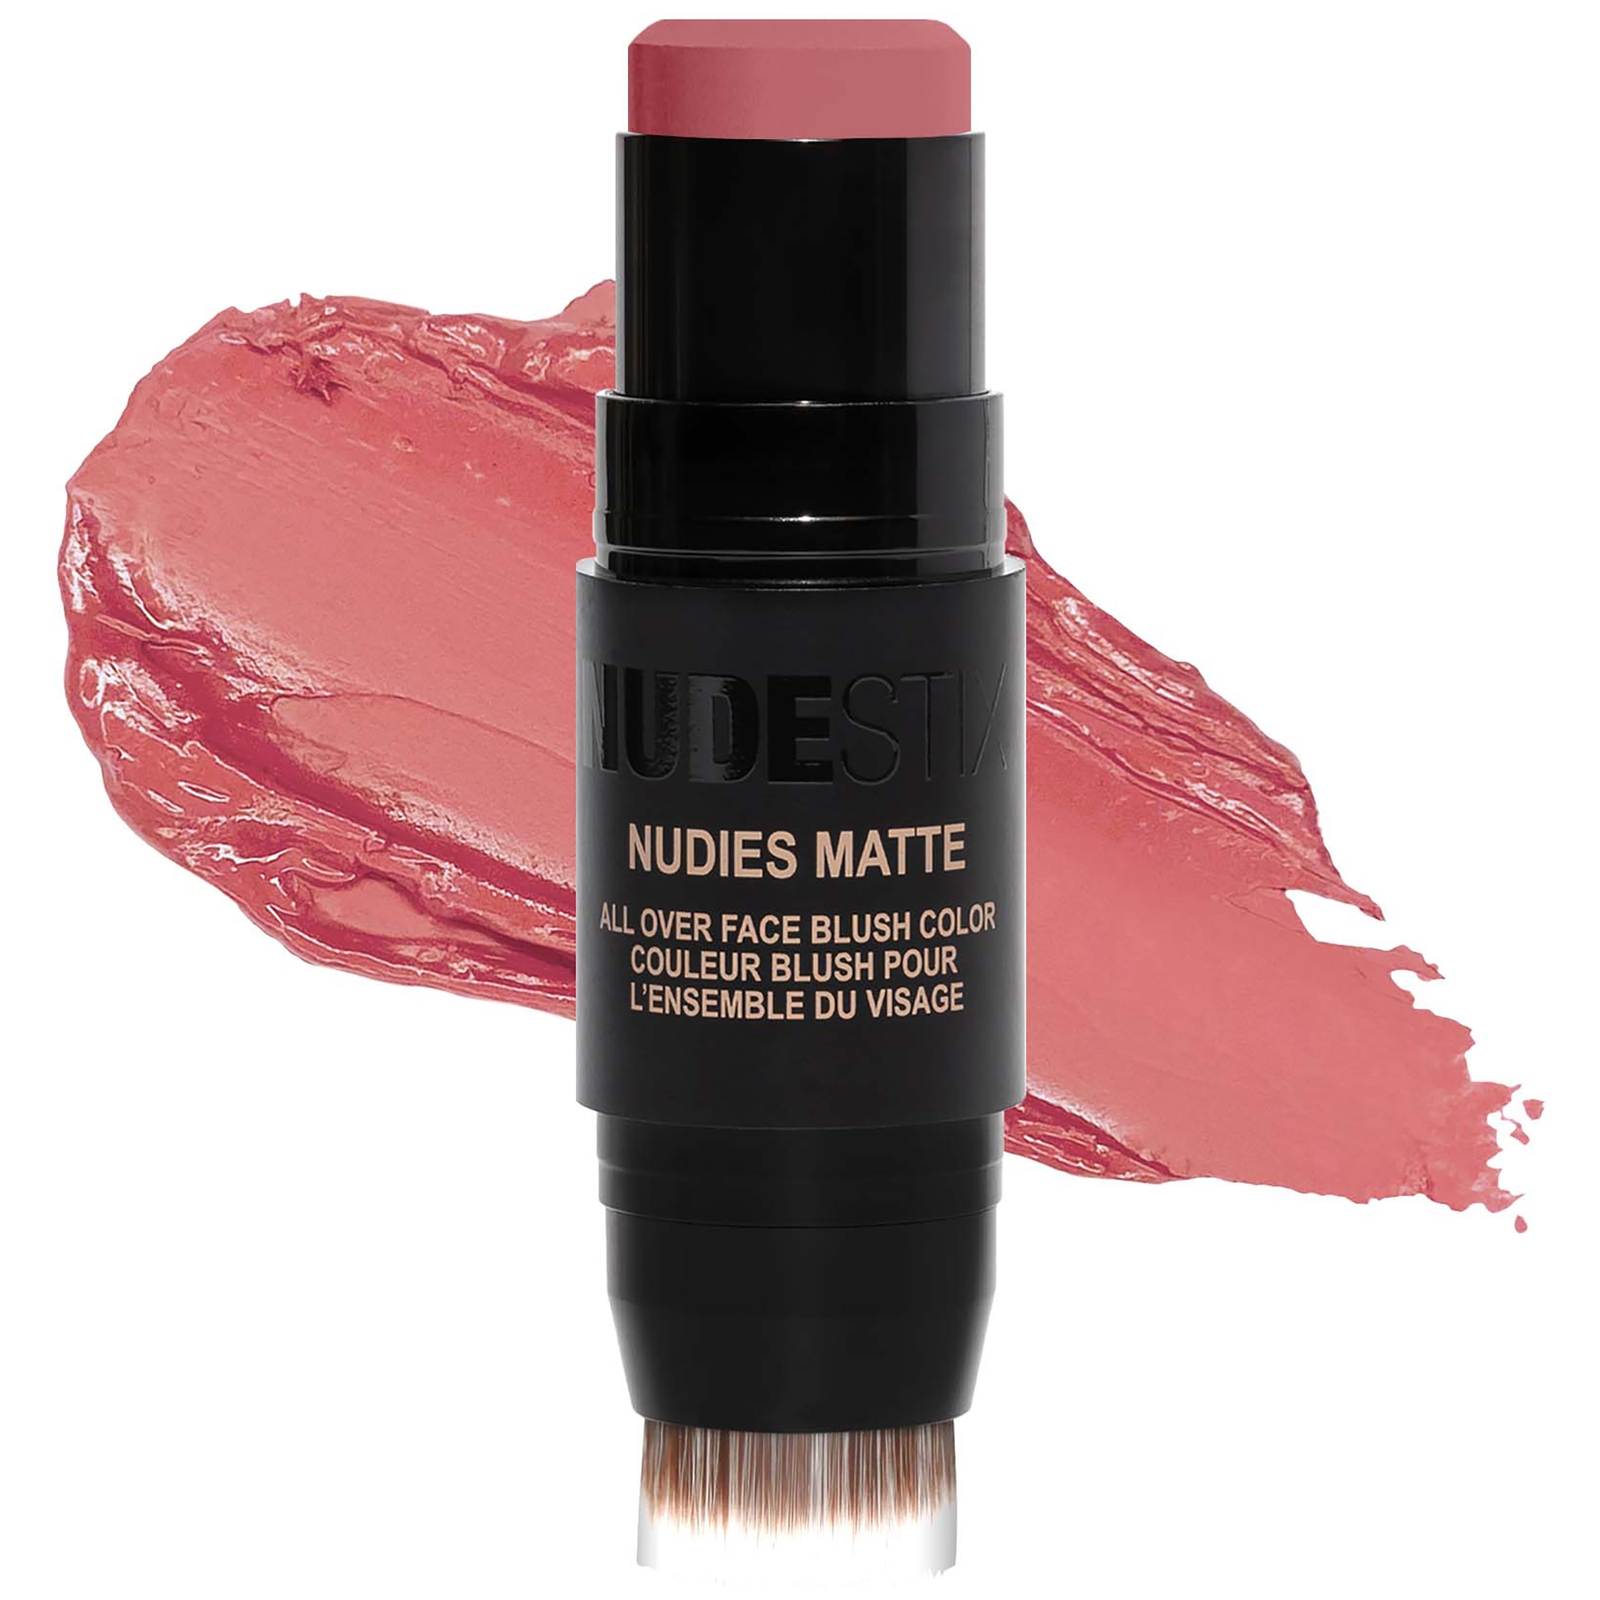 Image of NUDESTIX Nudies Matte All Over Face Blush Colour 7g (Various Shades) - Cherie